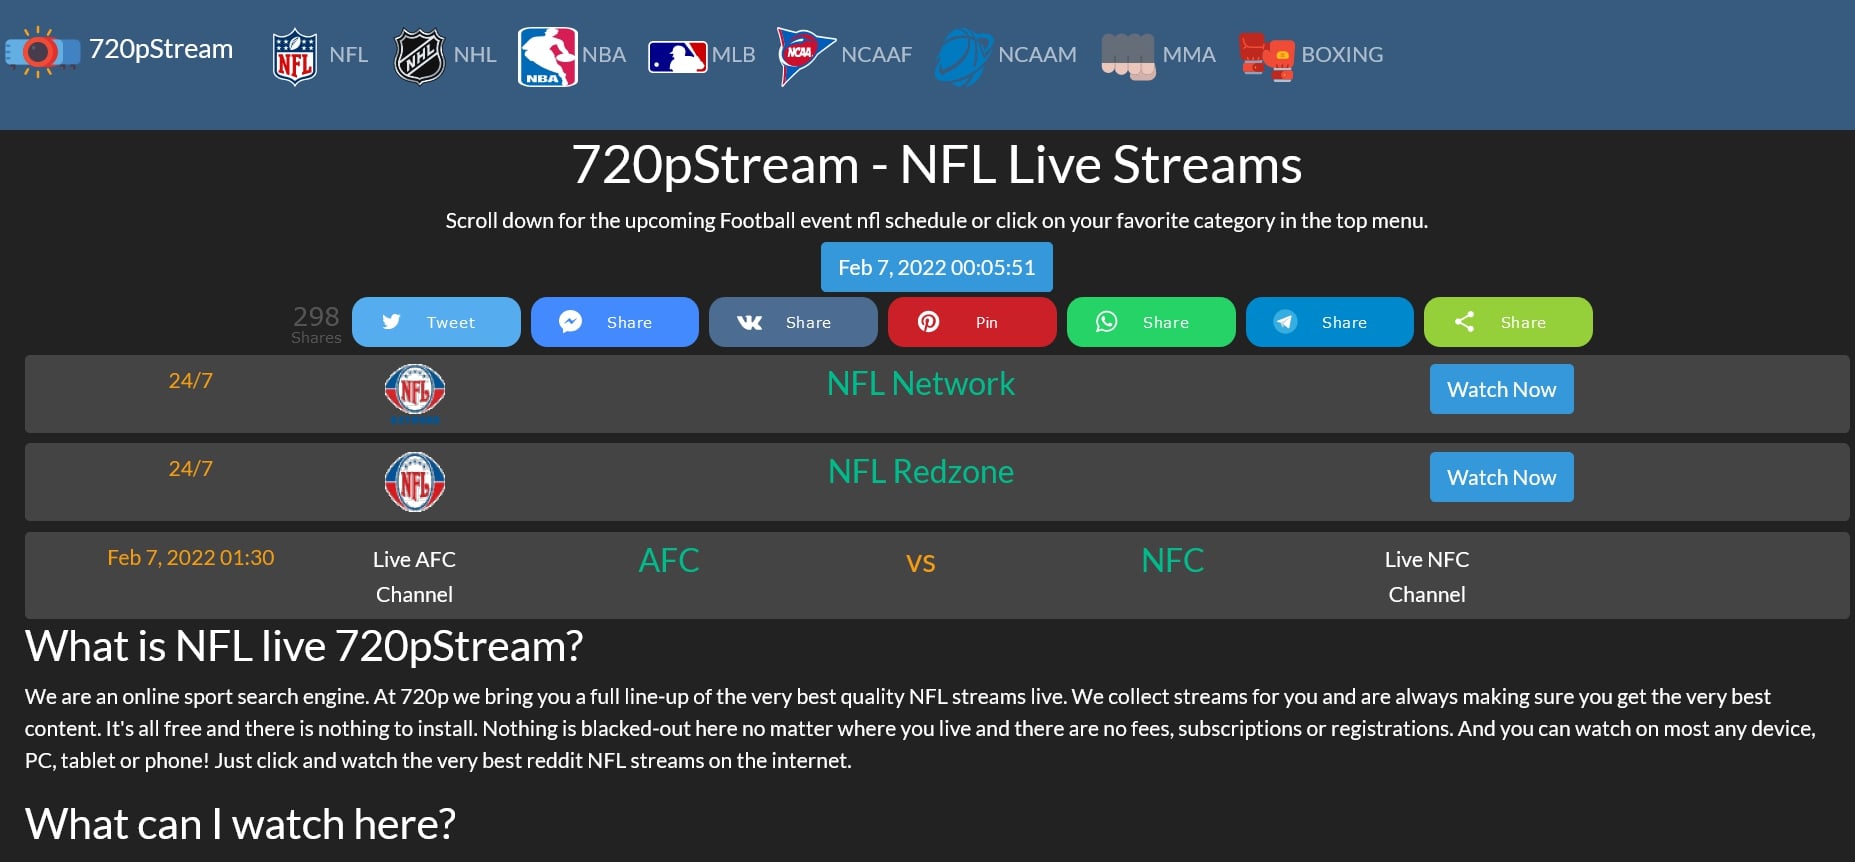 720pStream website showing NFL live streaming options